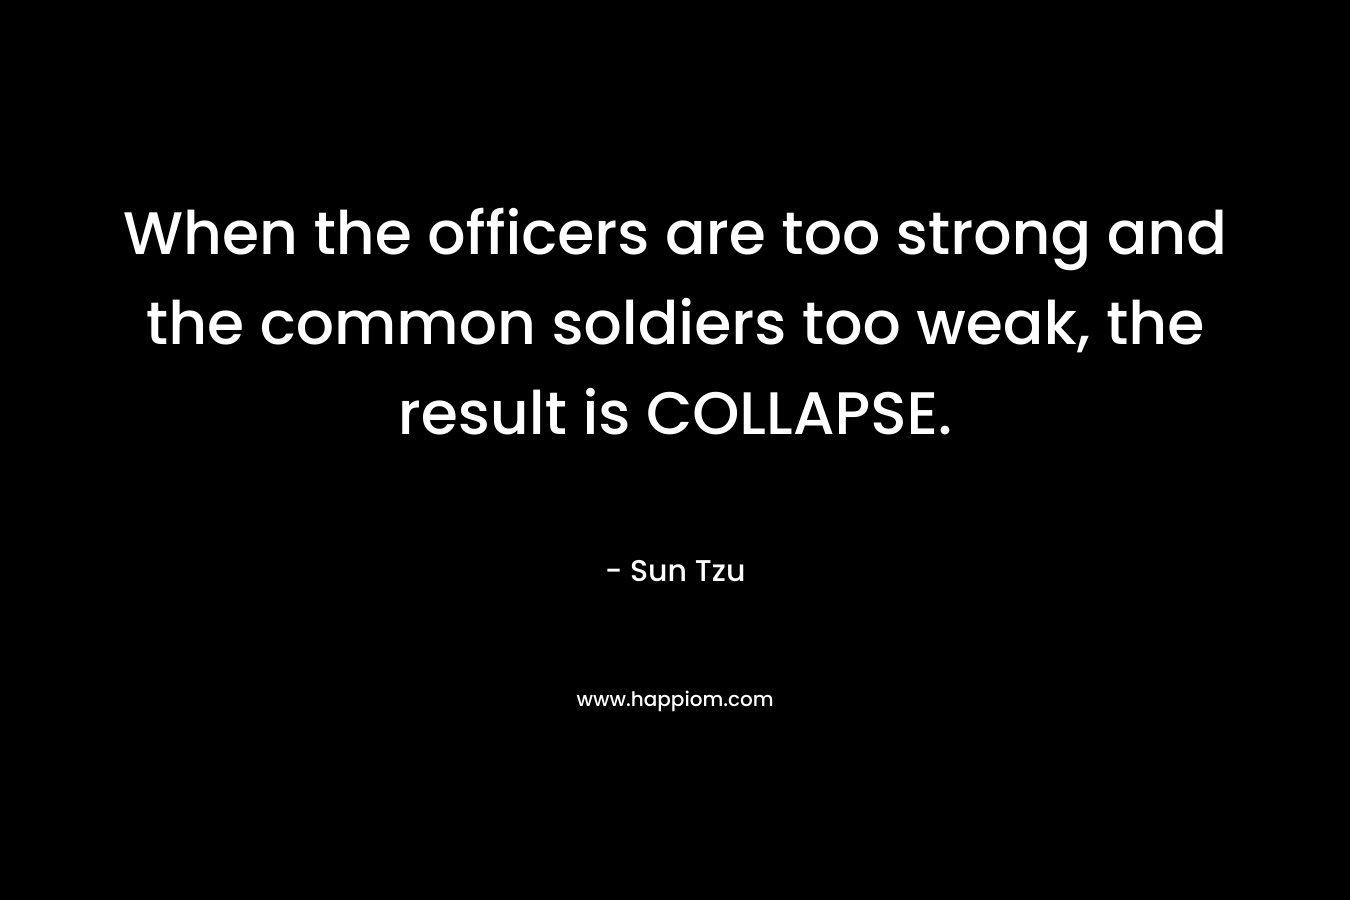 When the officers are too strong and the common soldiers too weak, the result is COLLAPSE. – Sun Tzu